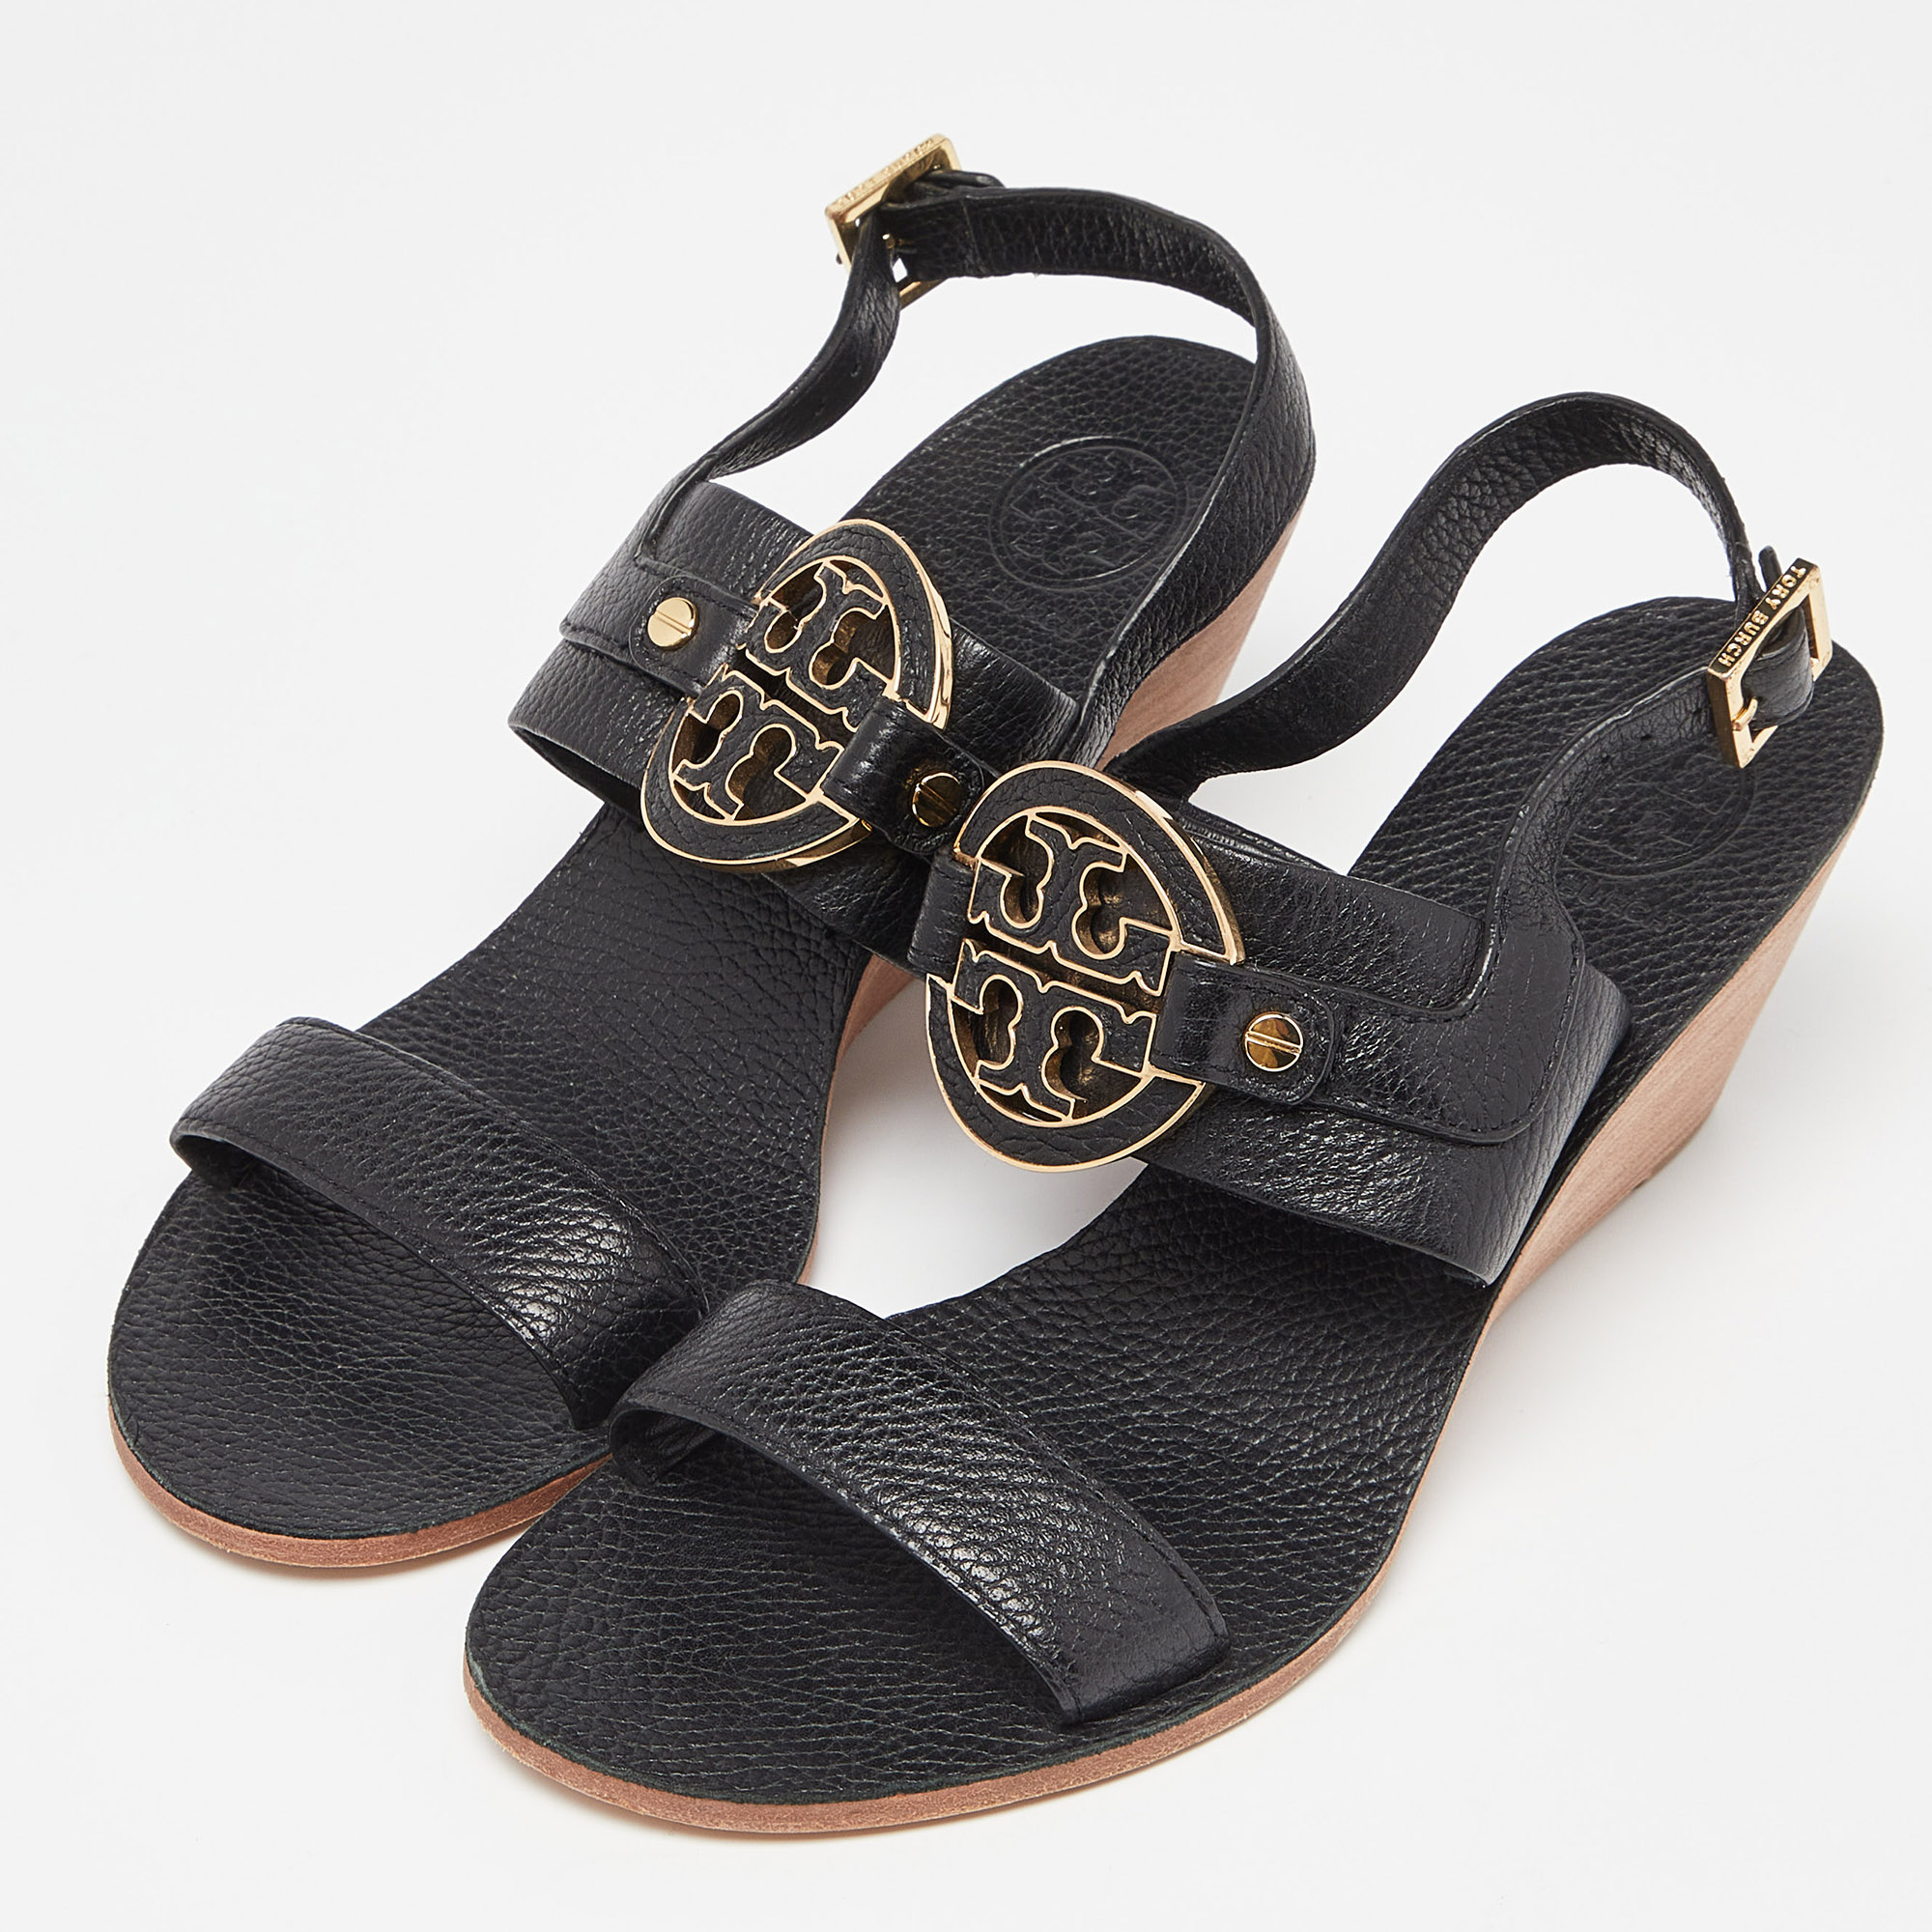 

Tory Burch Black Leather Wedge Slingback Sandals Size